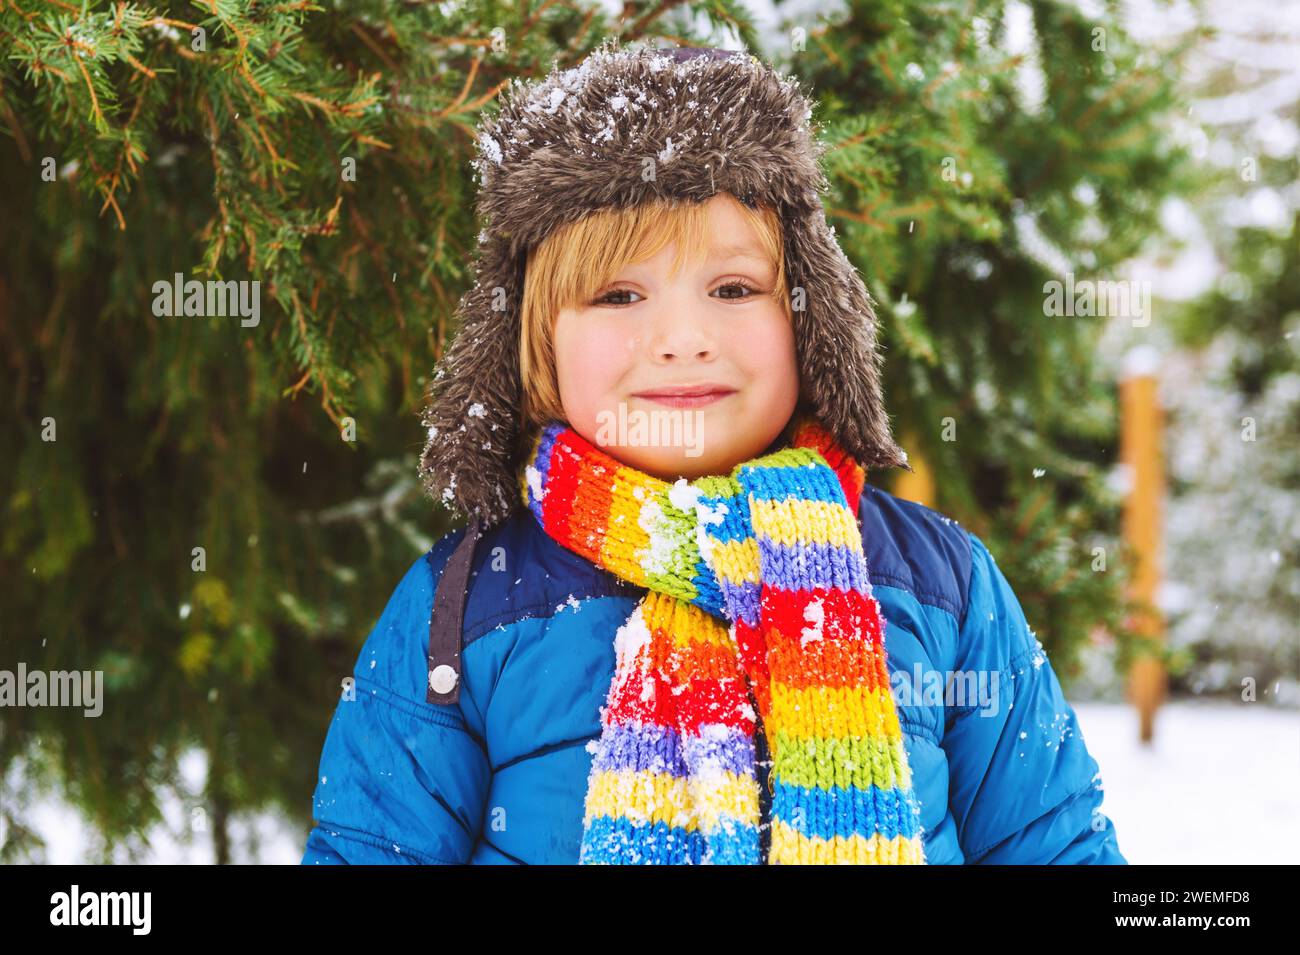 Cute little boy playing in winter park. Kid having fun outdoors, running on snow, wearing warm blue jacket, hat and scarf Stock Photo